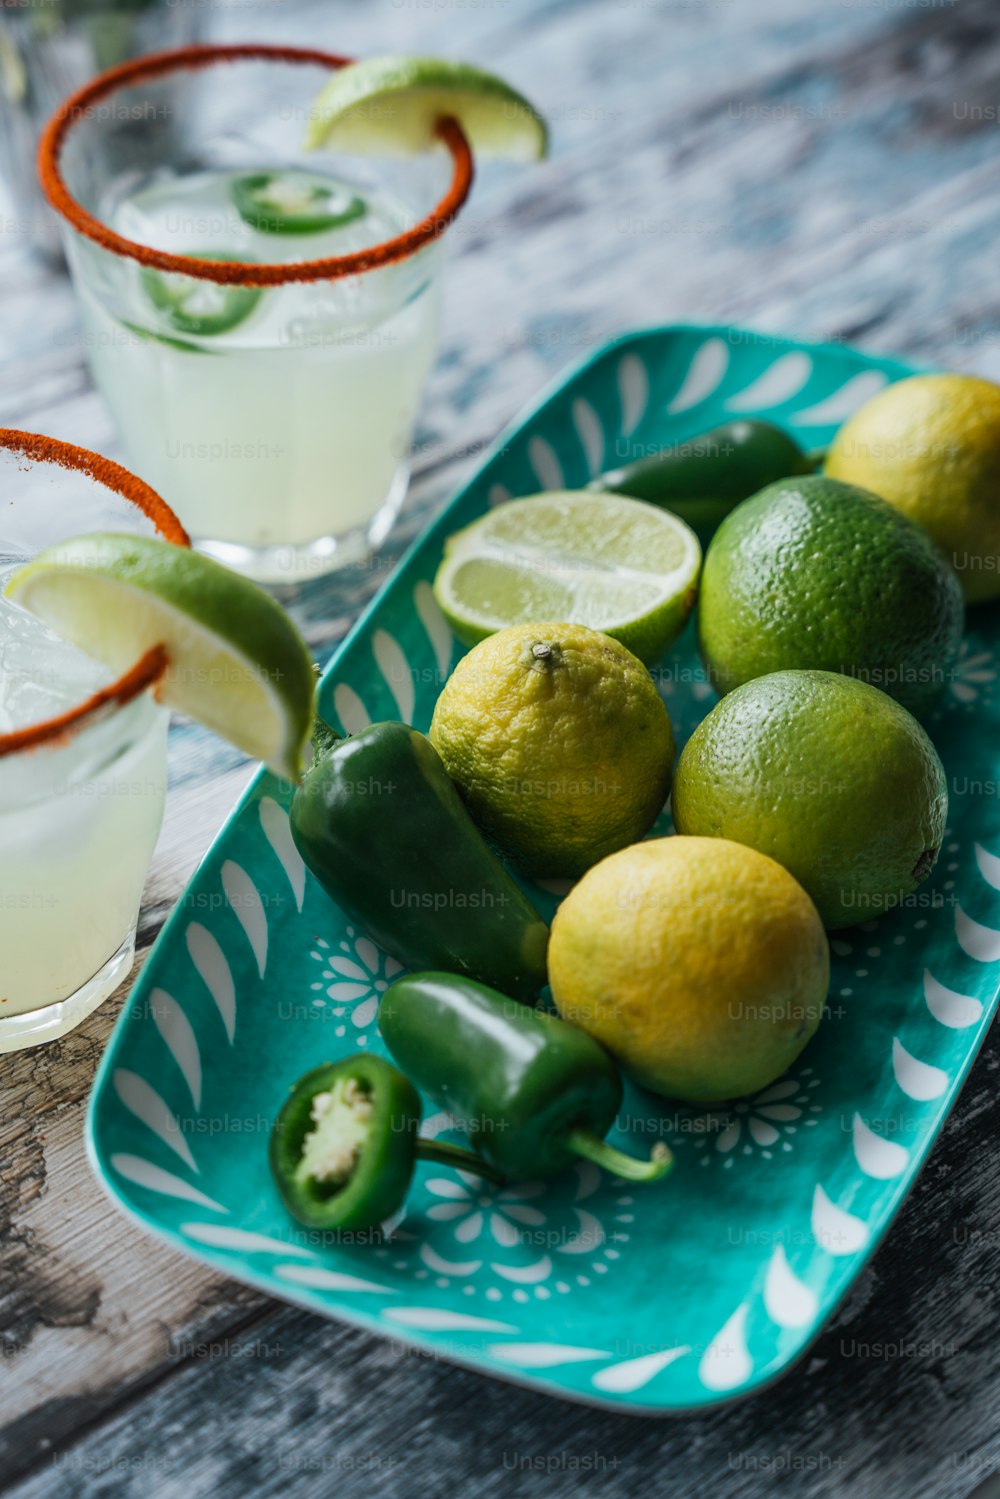 a plate of limes, peppers, and limeade on a table